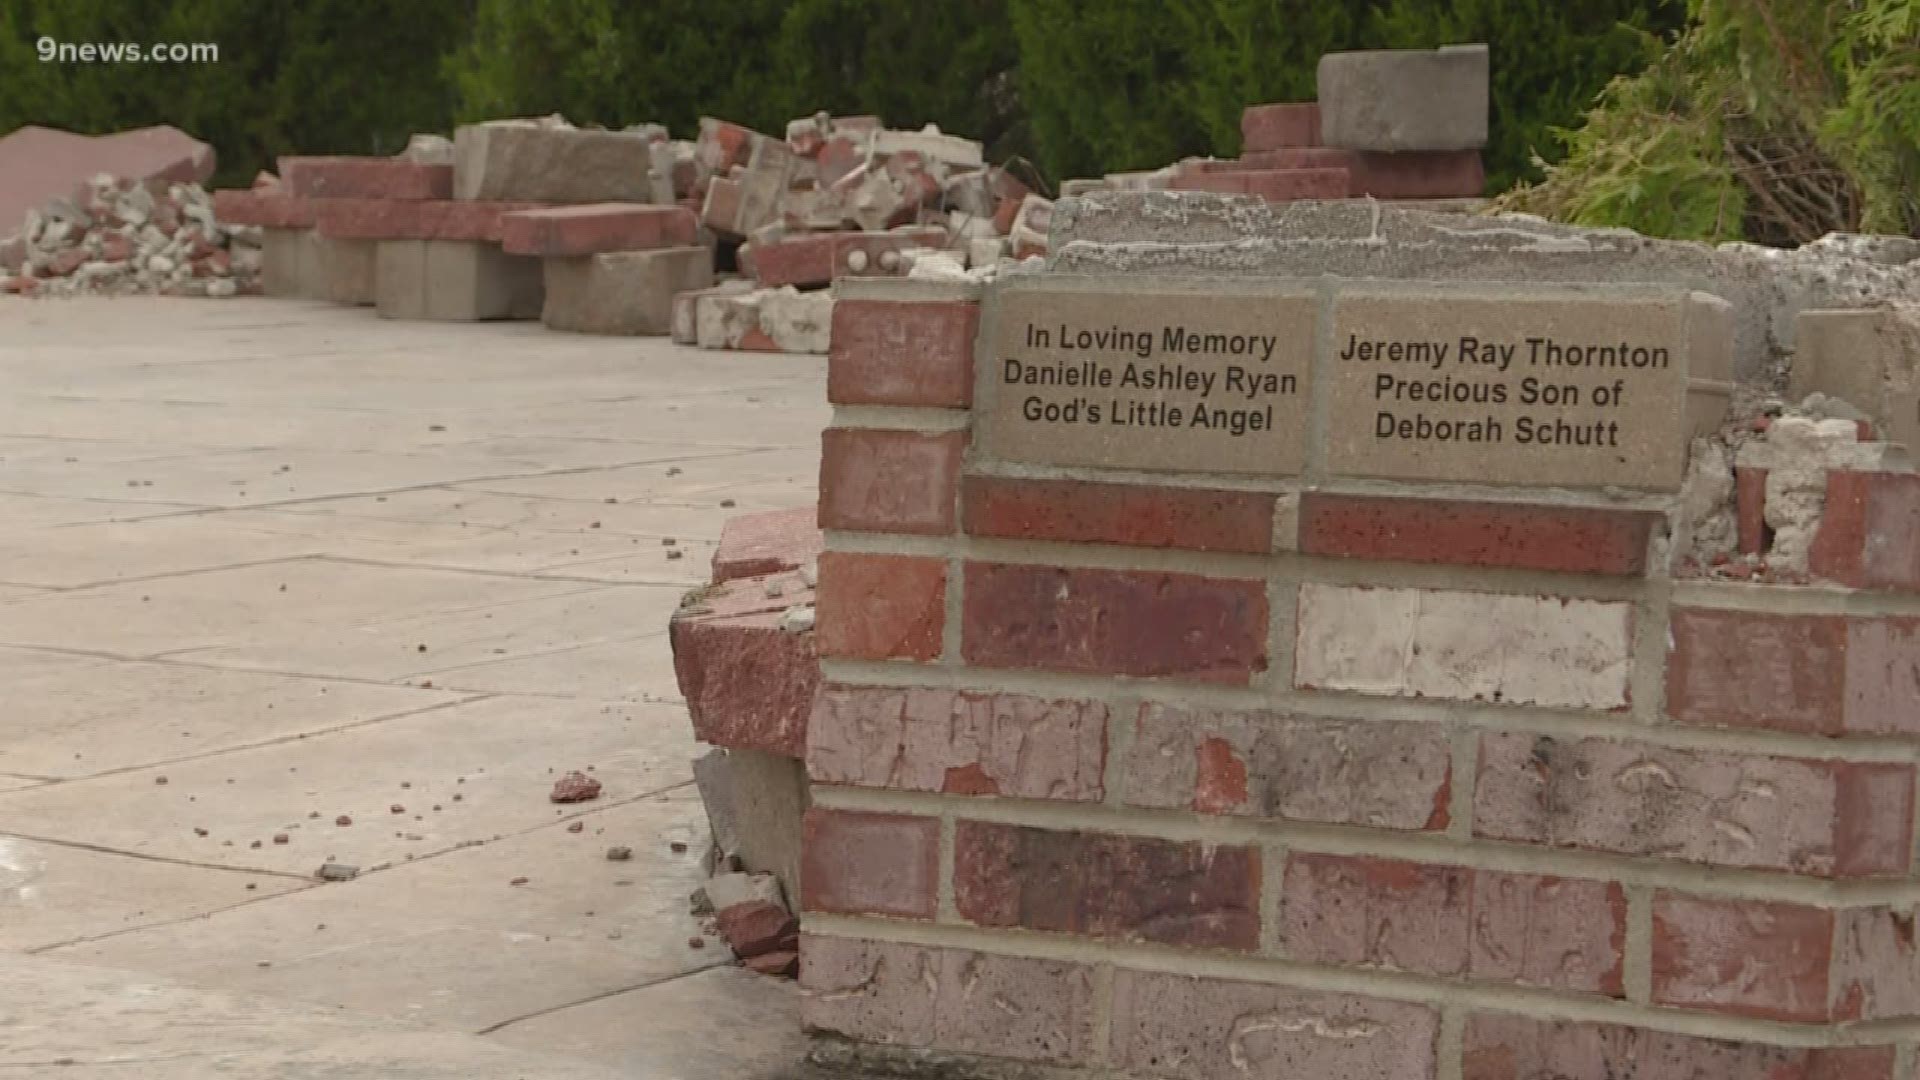 The pillars were located at the Smoky Hill Baptist Church and contained ashes and names of the deceased.